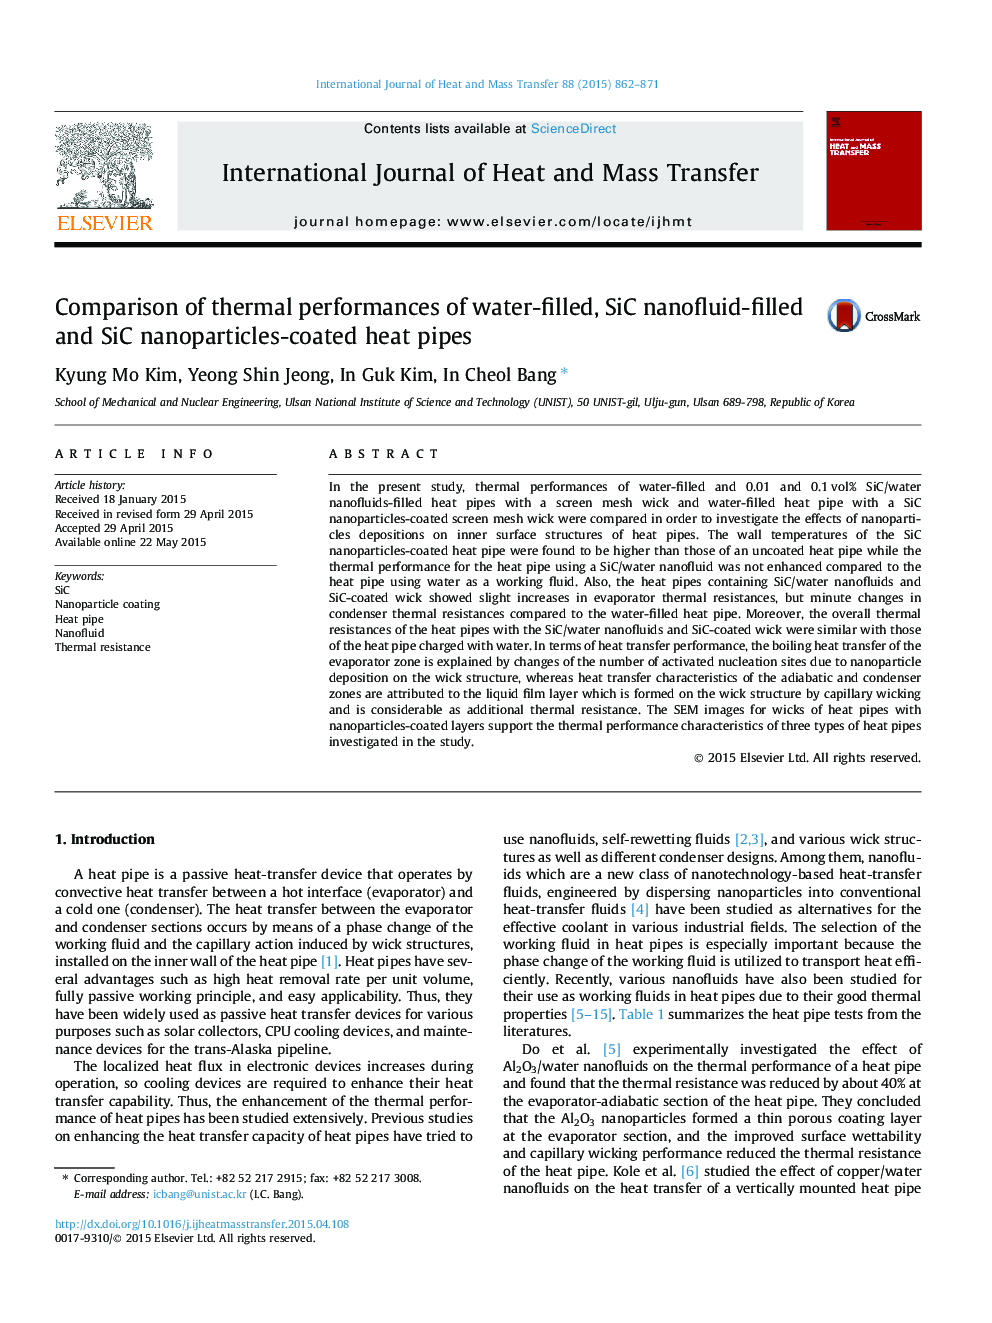 Comparison of thermal performances of water-filled, SiC nanofluid-filled and SiC nanoparticles-coated heat pipes